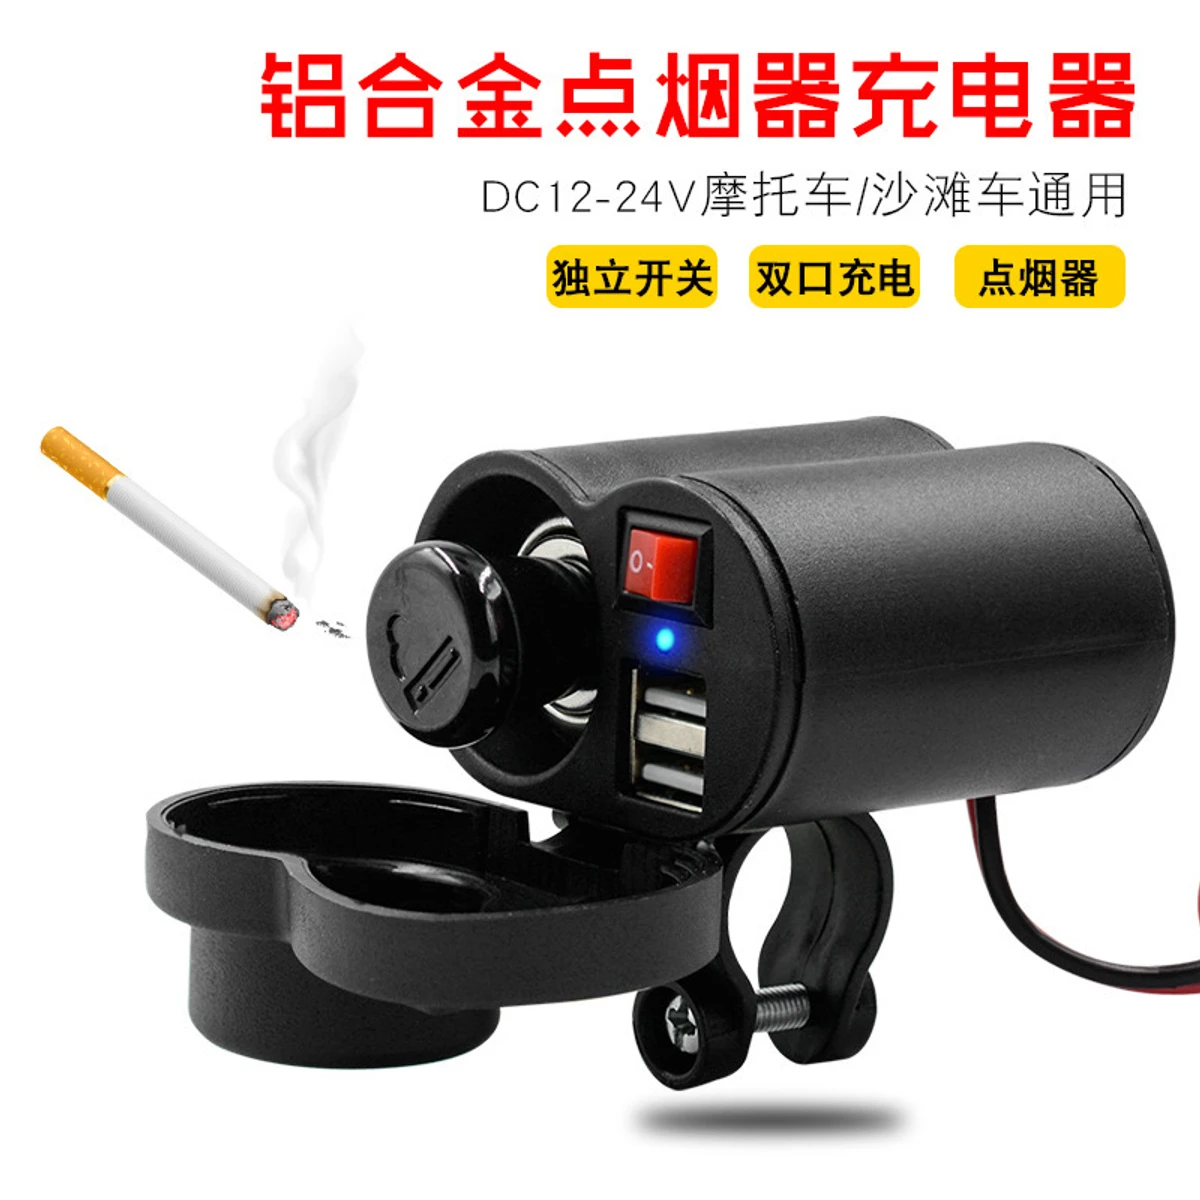 Waterproof Motorcycle USB Charger With Lighter